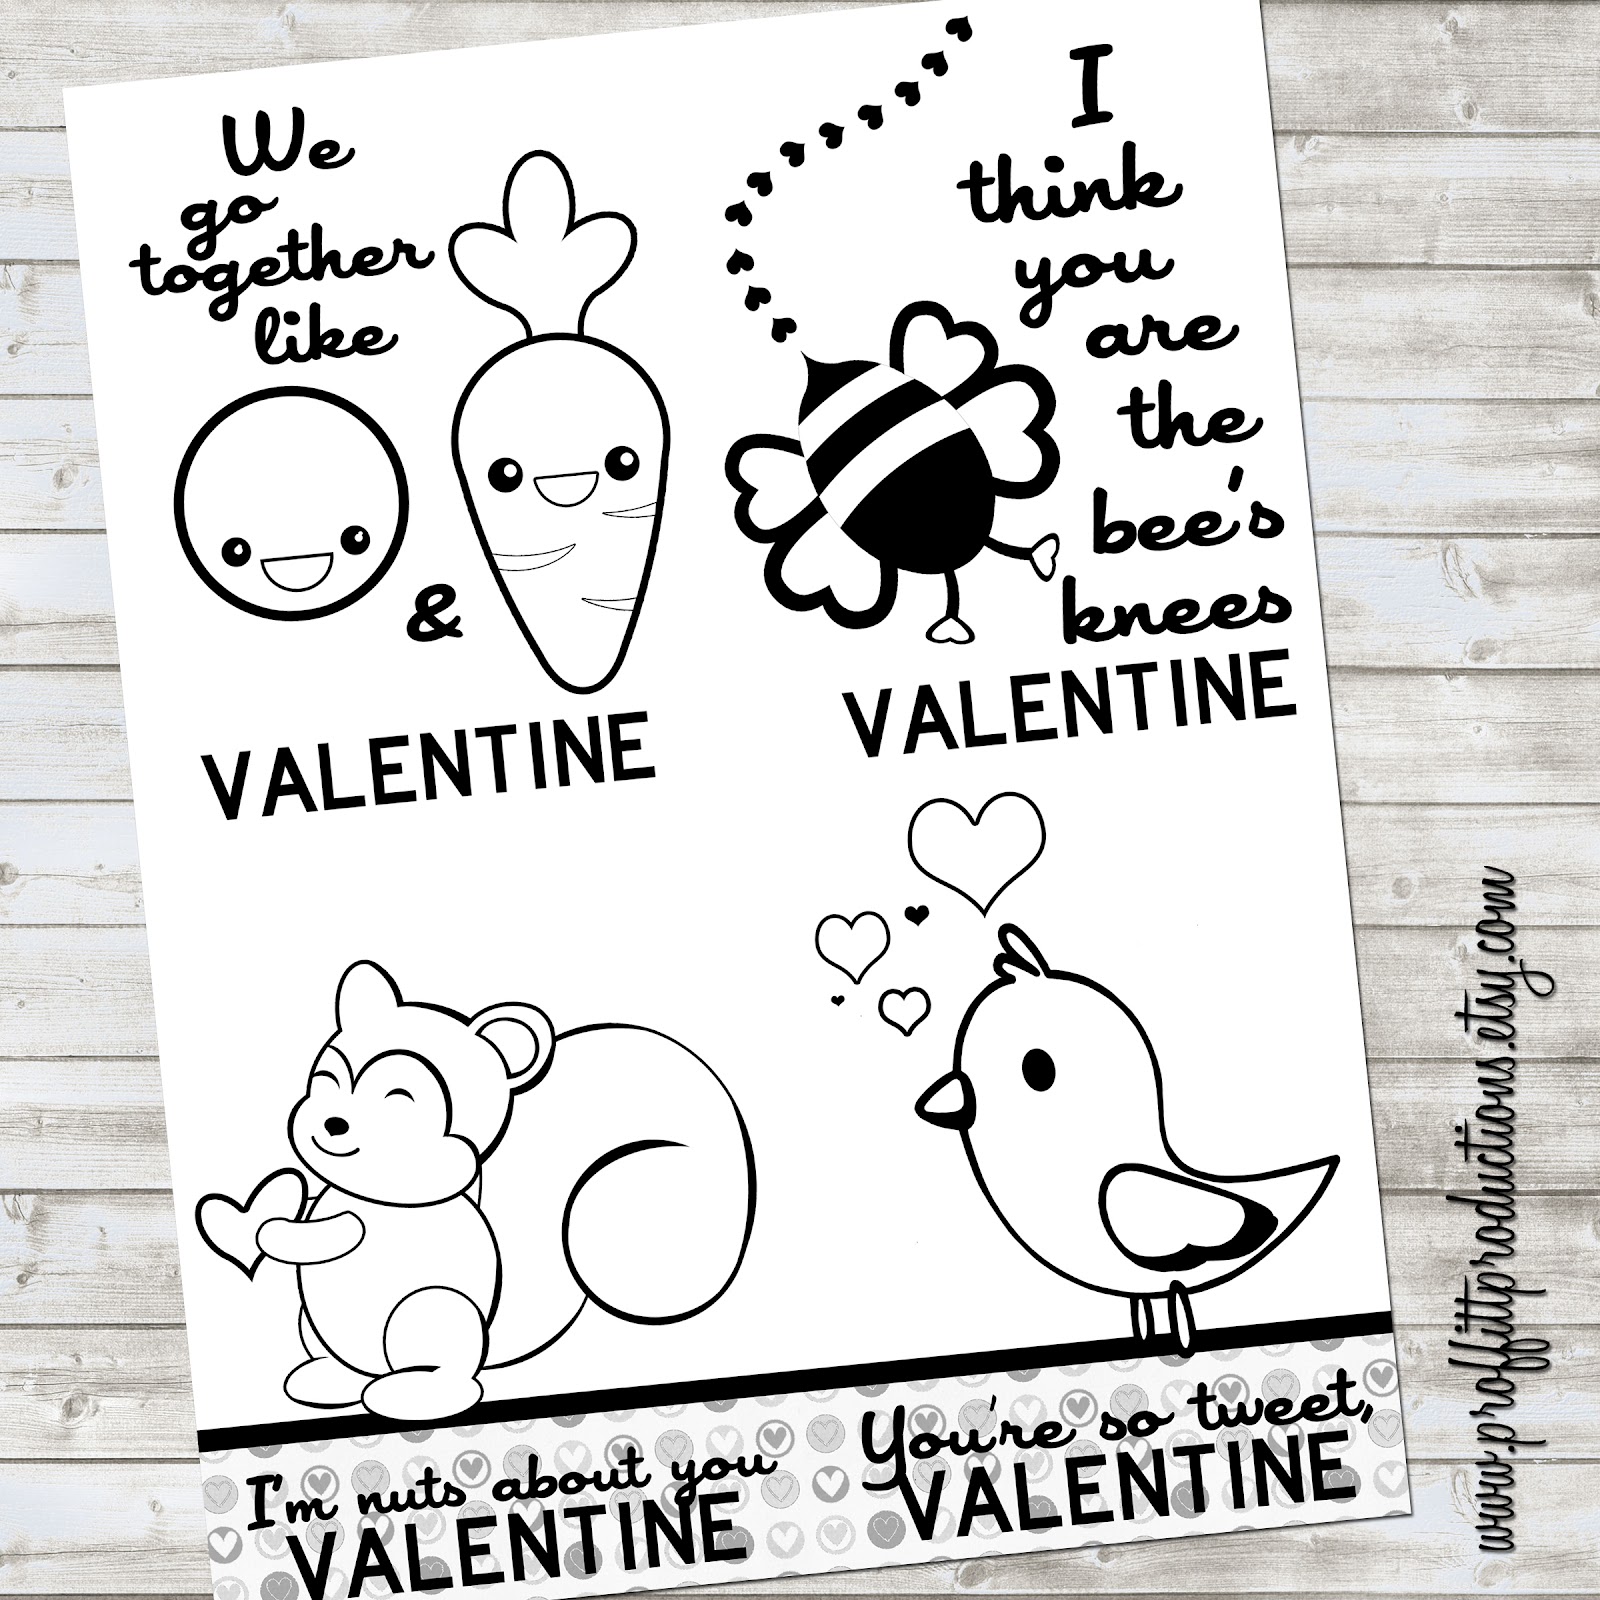 Valentines day sayings for kids, valentines day sayings